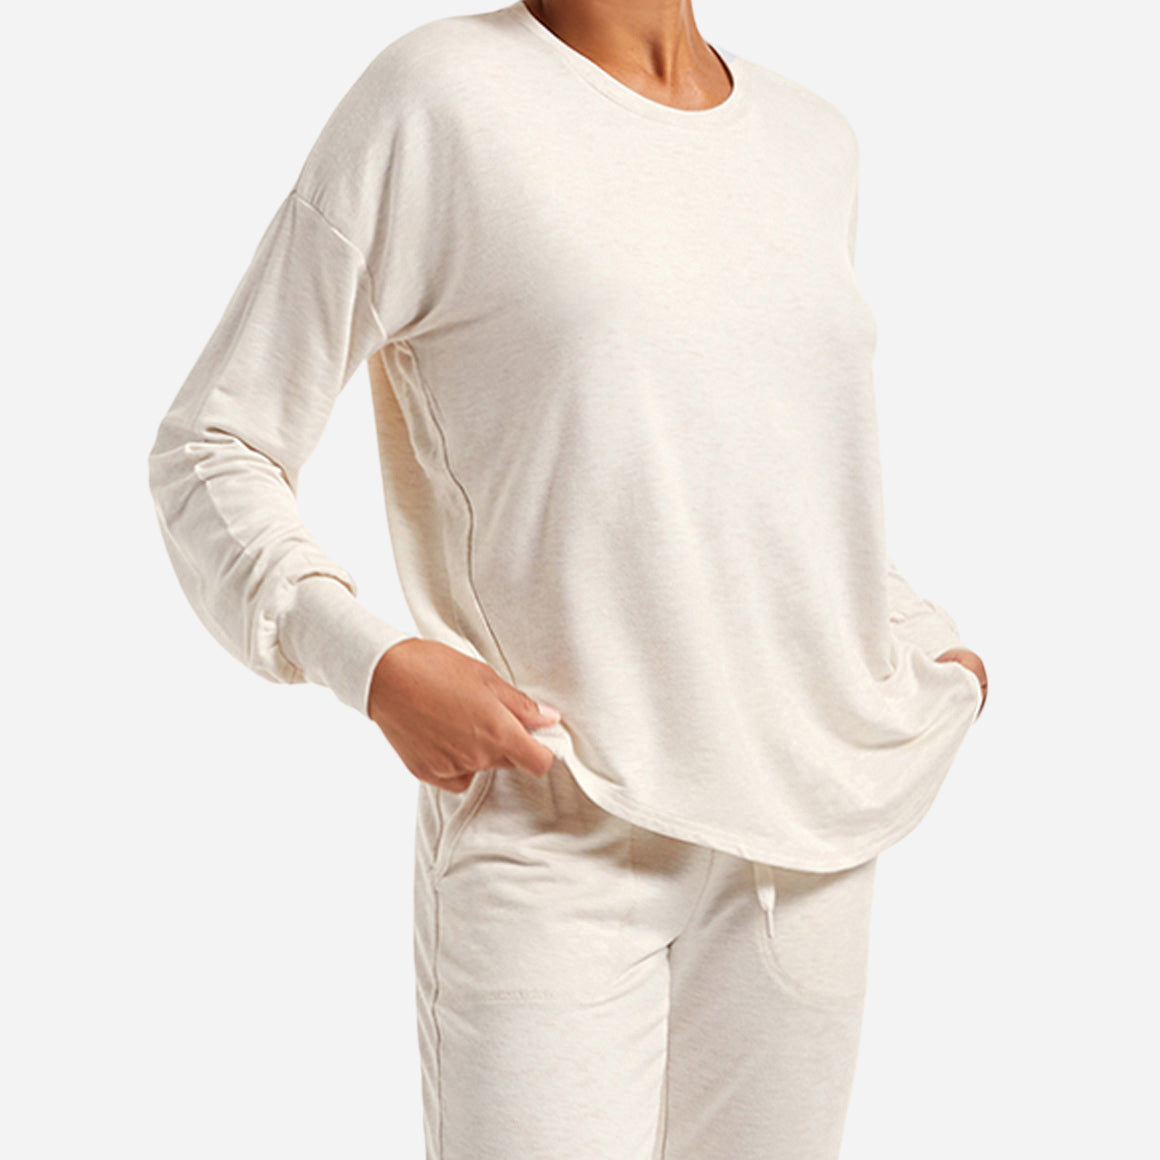 This t-shirt has a relaxed, slightly oversized fit and features a flattering crew neckline, curved hemline for extra coverage, and dropped shoulders perfect for sleep or play.